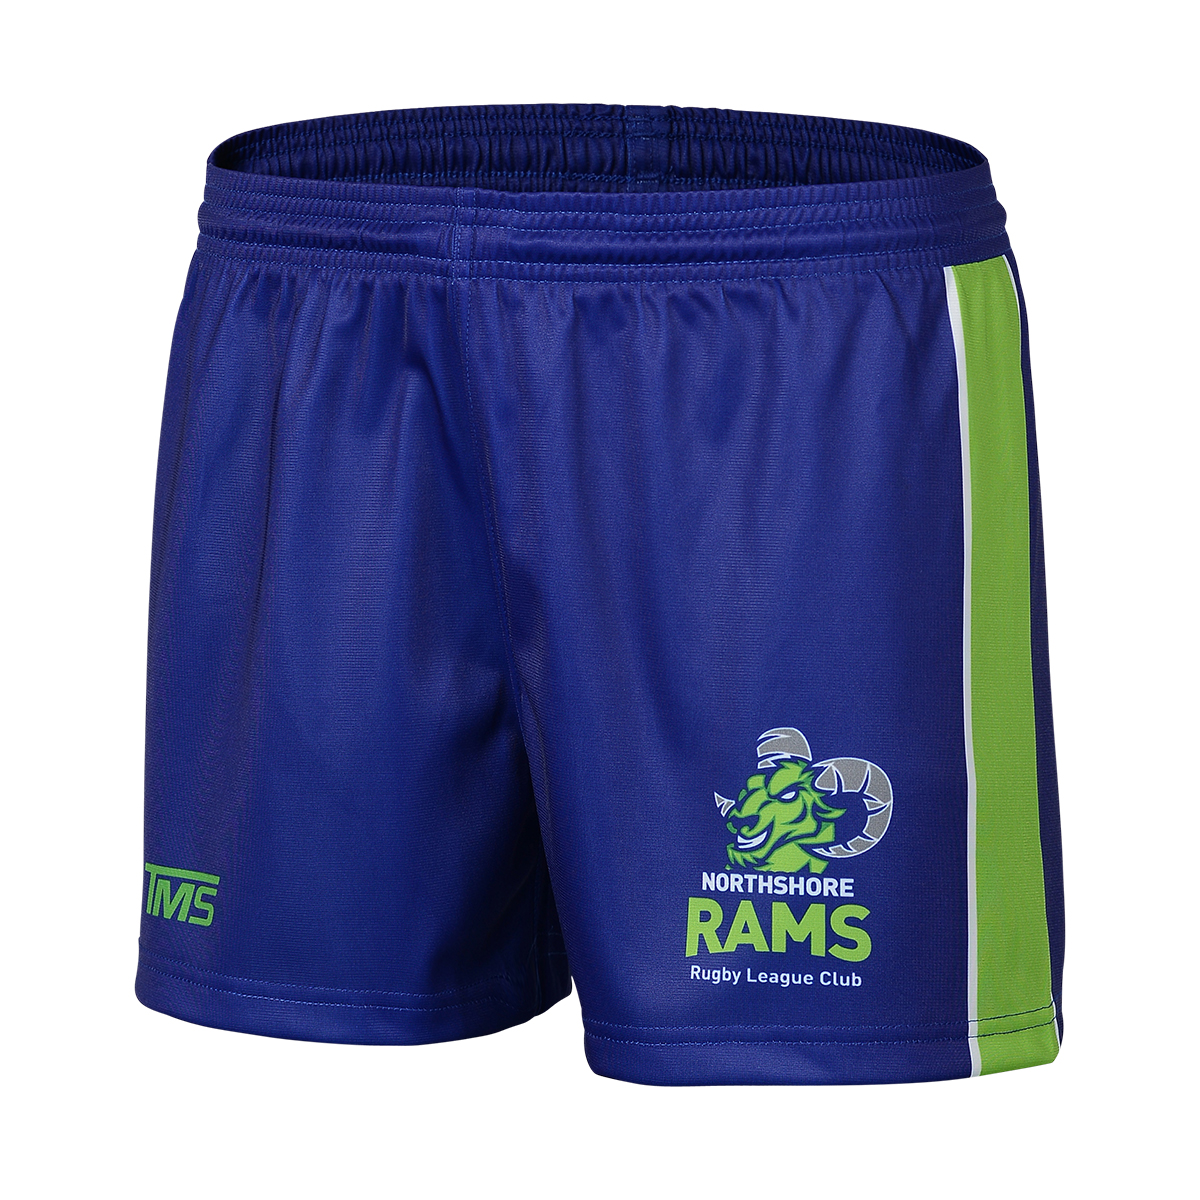 PerforMAX Rugby Shorts